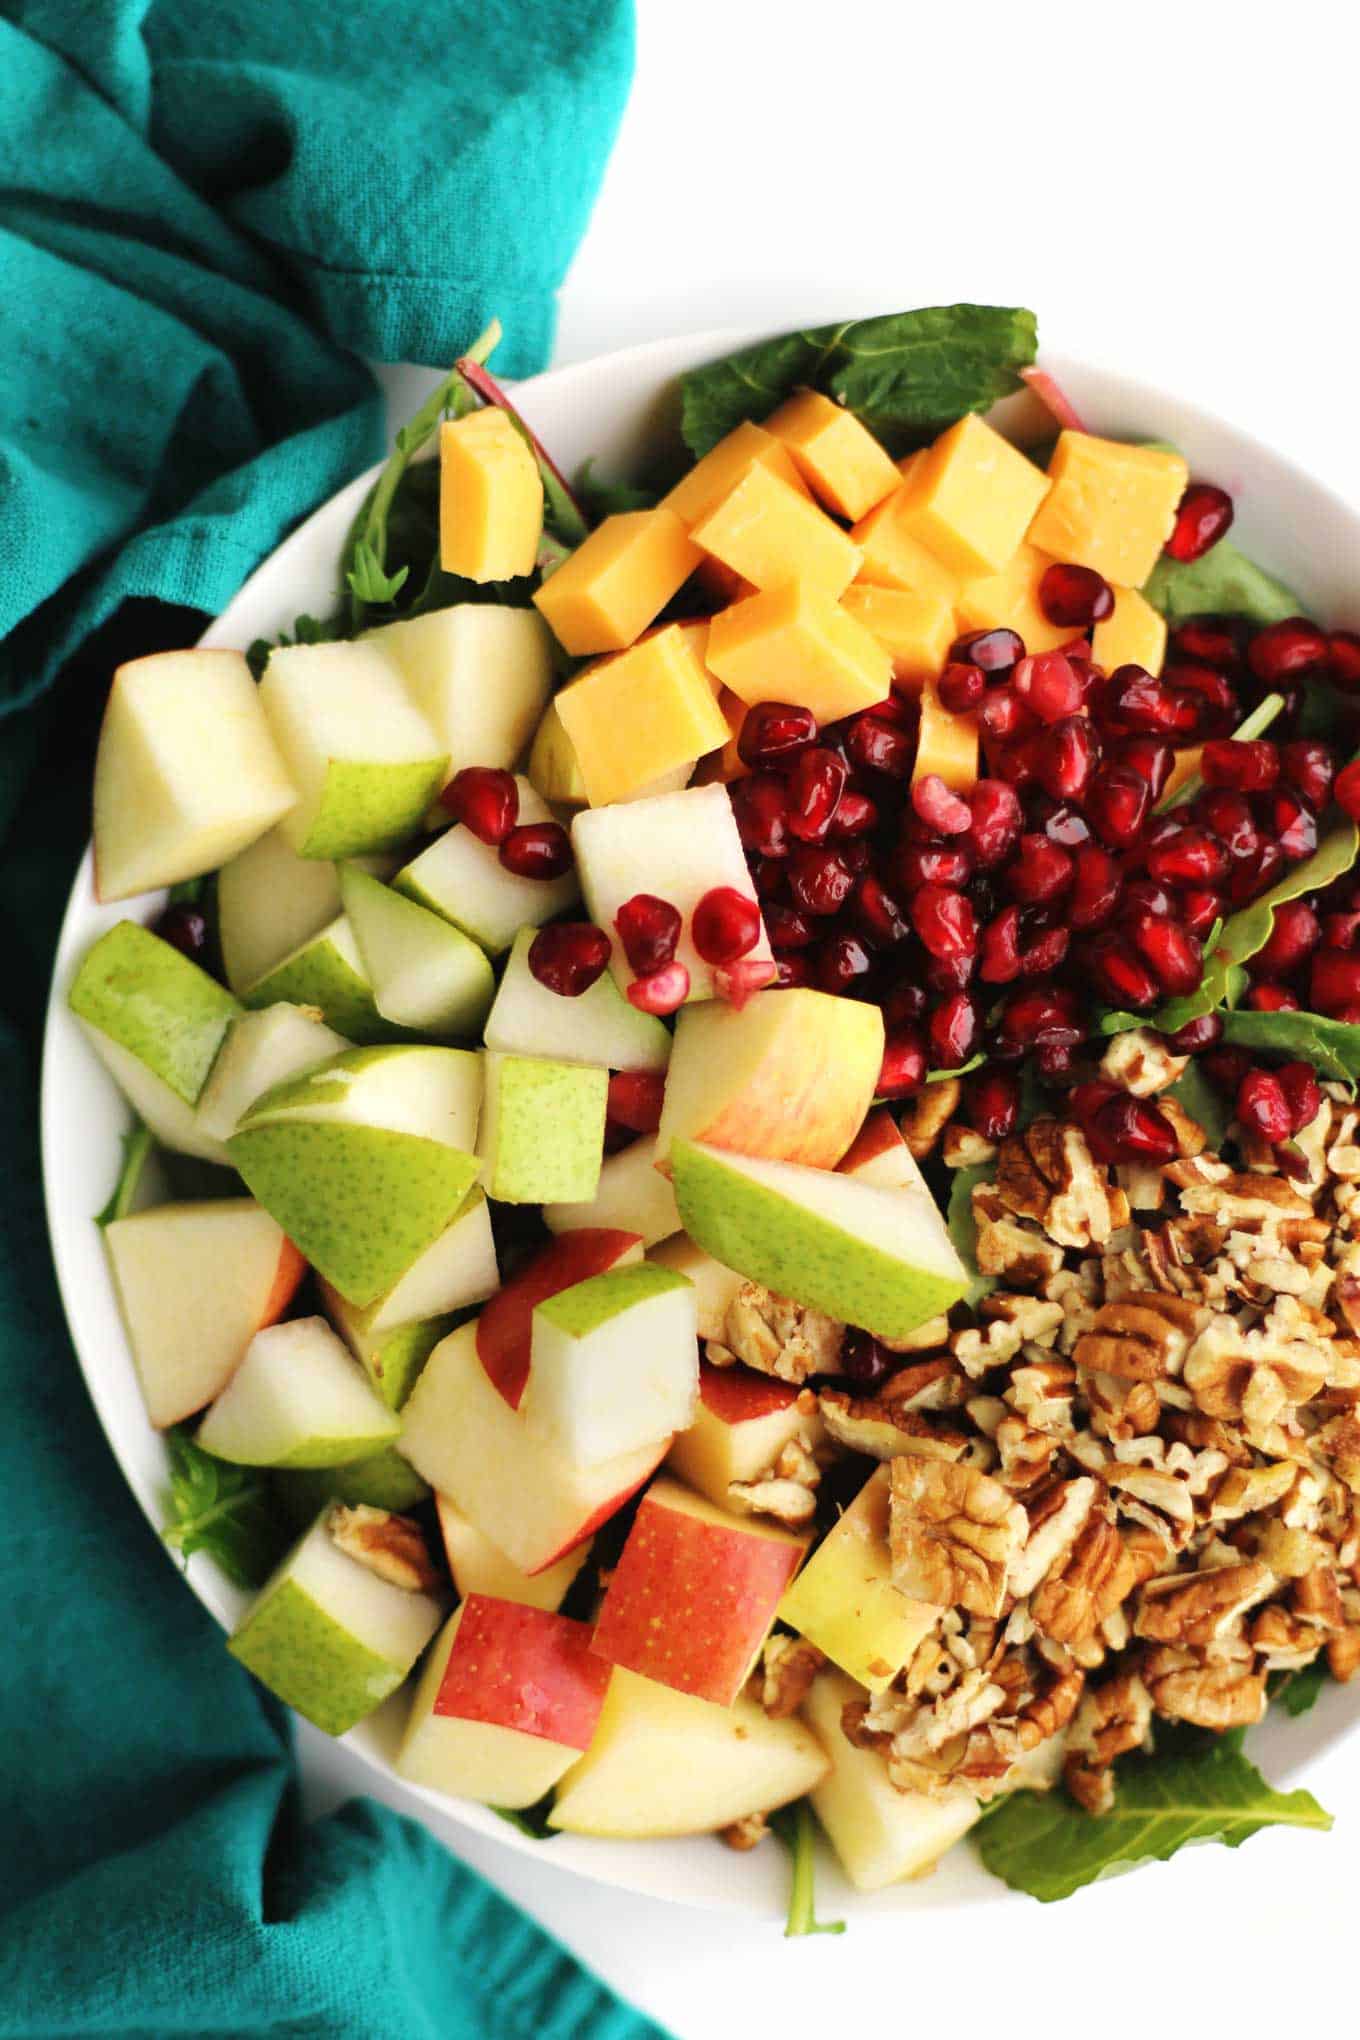 A close up photo of a salad with pears, apples, walnuts, cheddar cubes, and pomegranate arils.